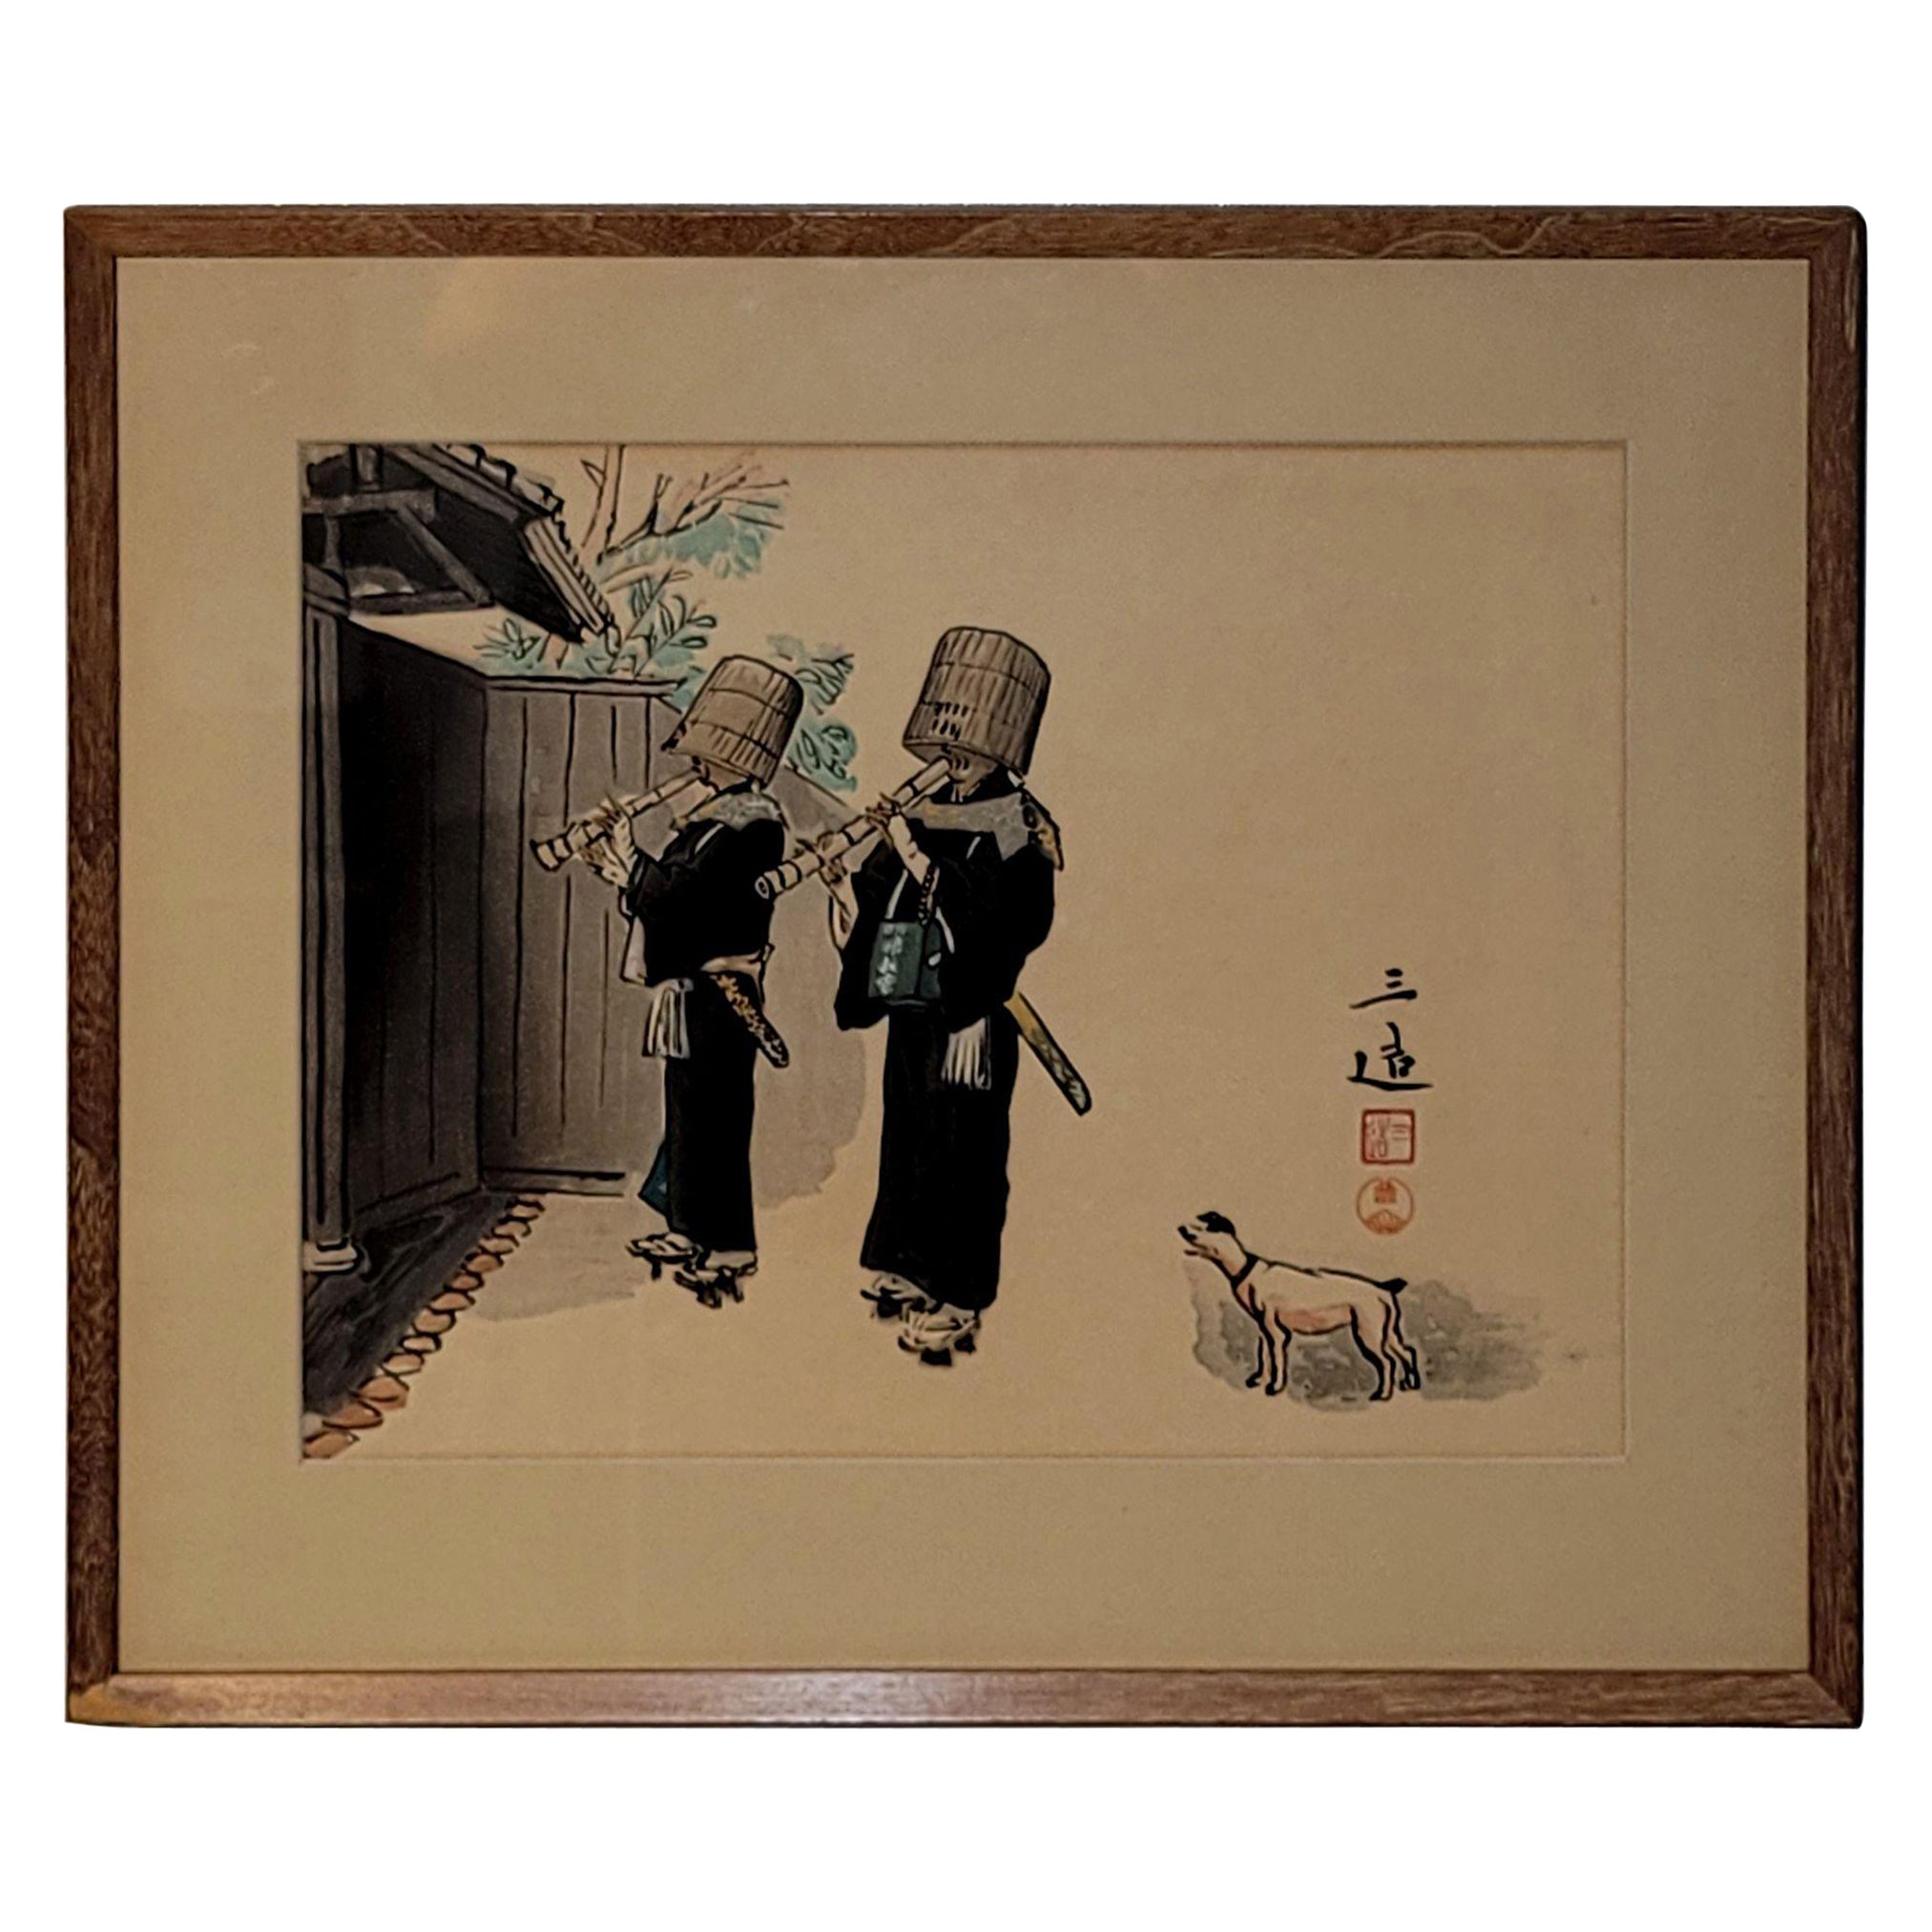 Japanese Woodblock Print " Zen Priest Of The Flute Sect" by Sanzo Wada #1